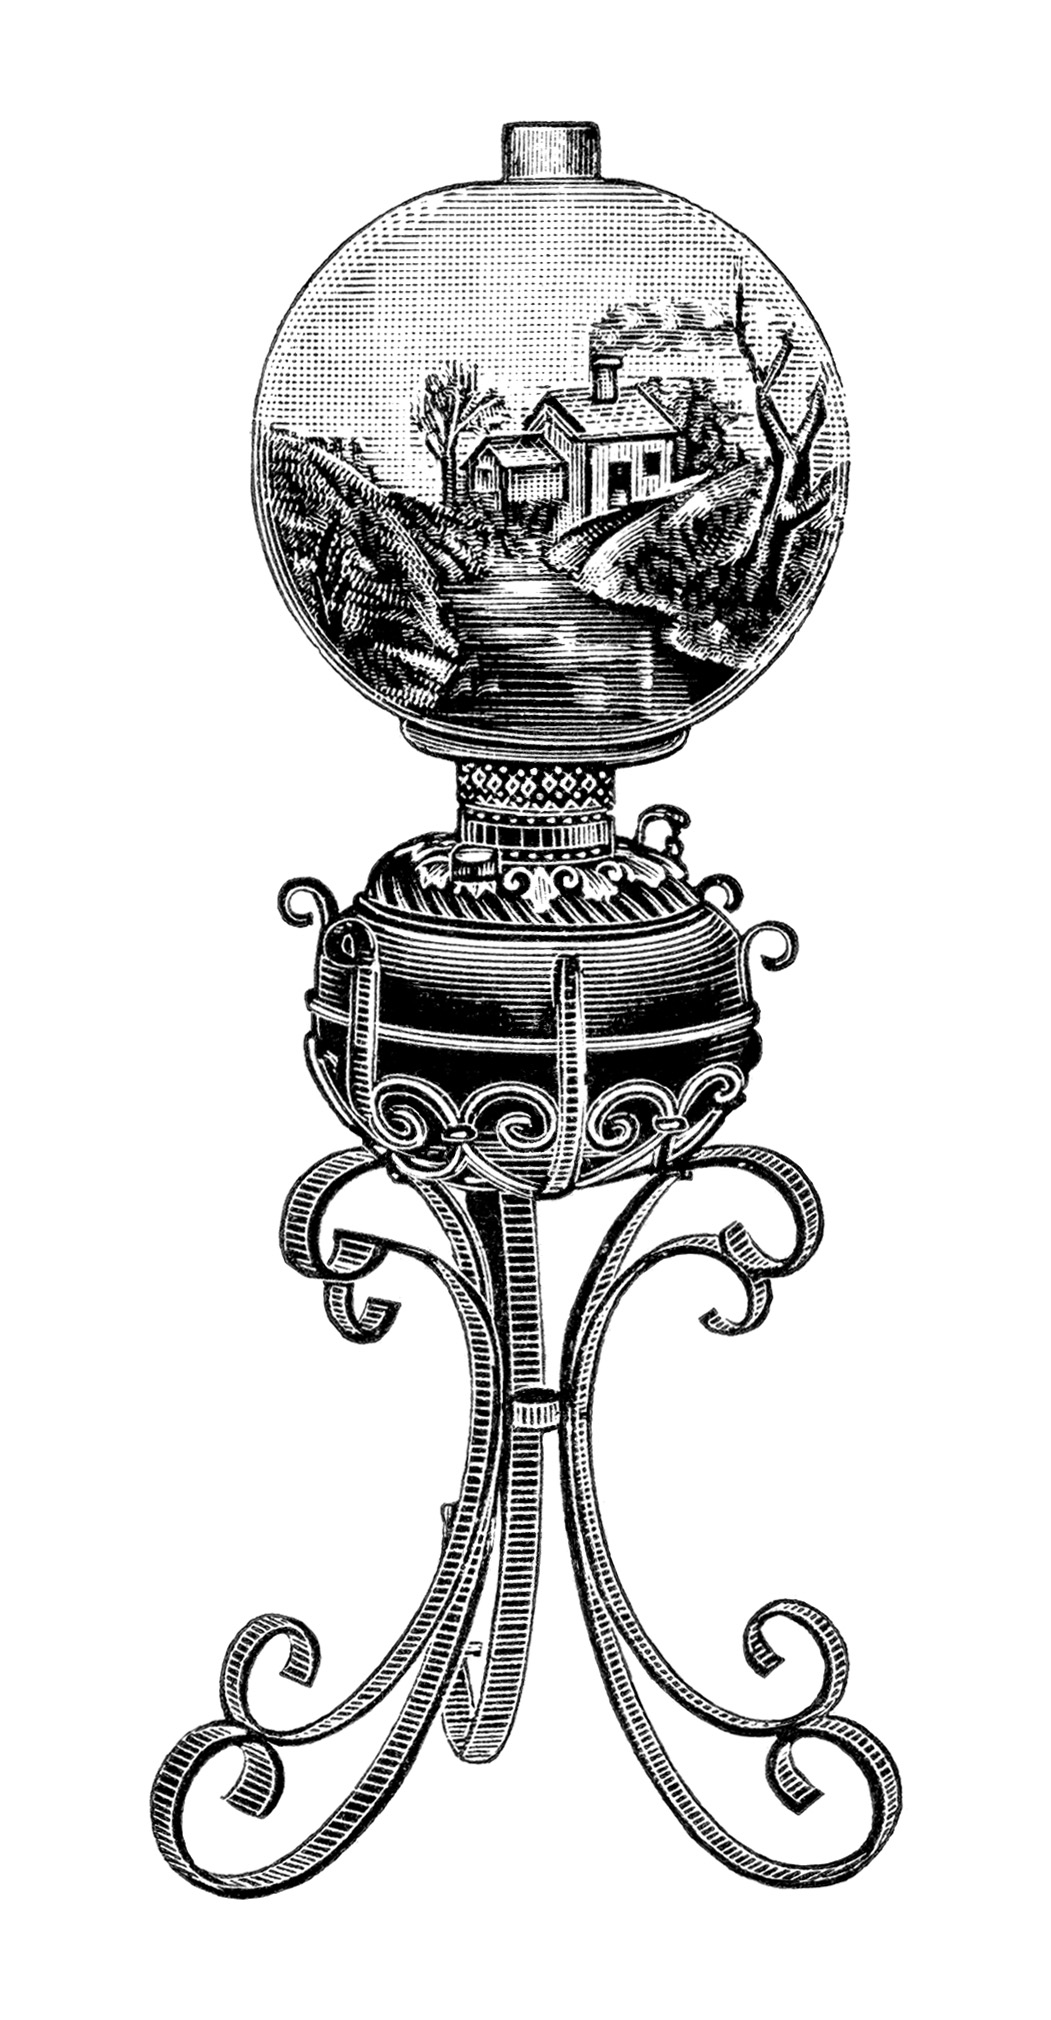 Antique Lamp Post Clip Art Click On Image To Enlarge